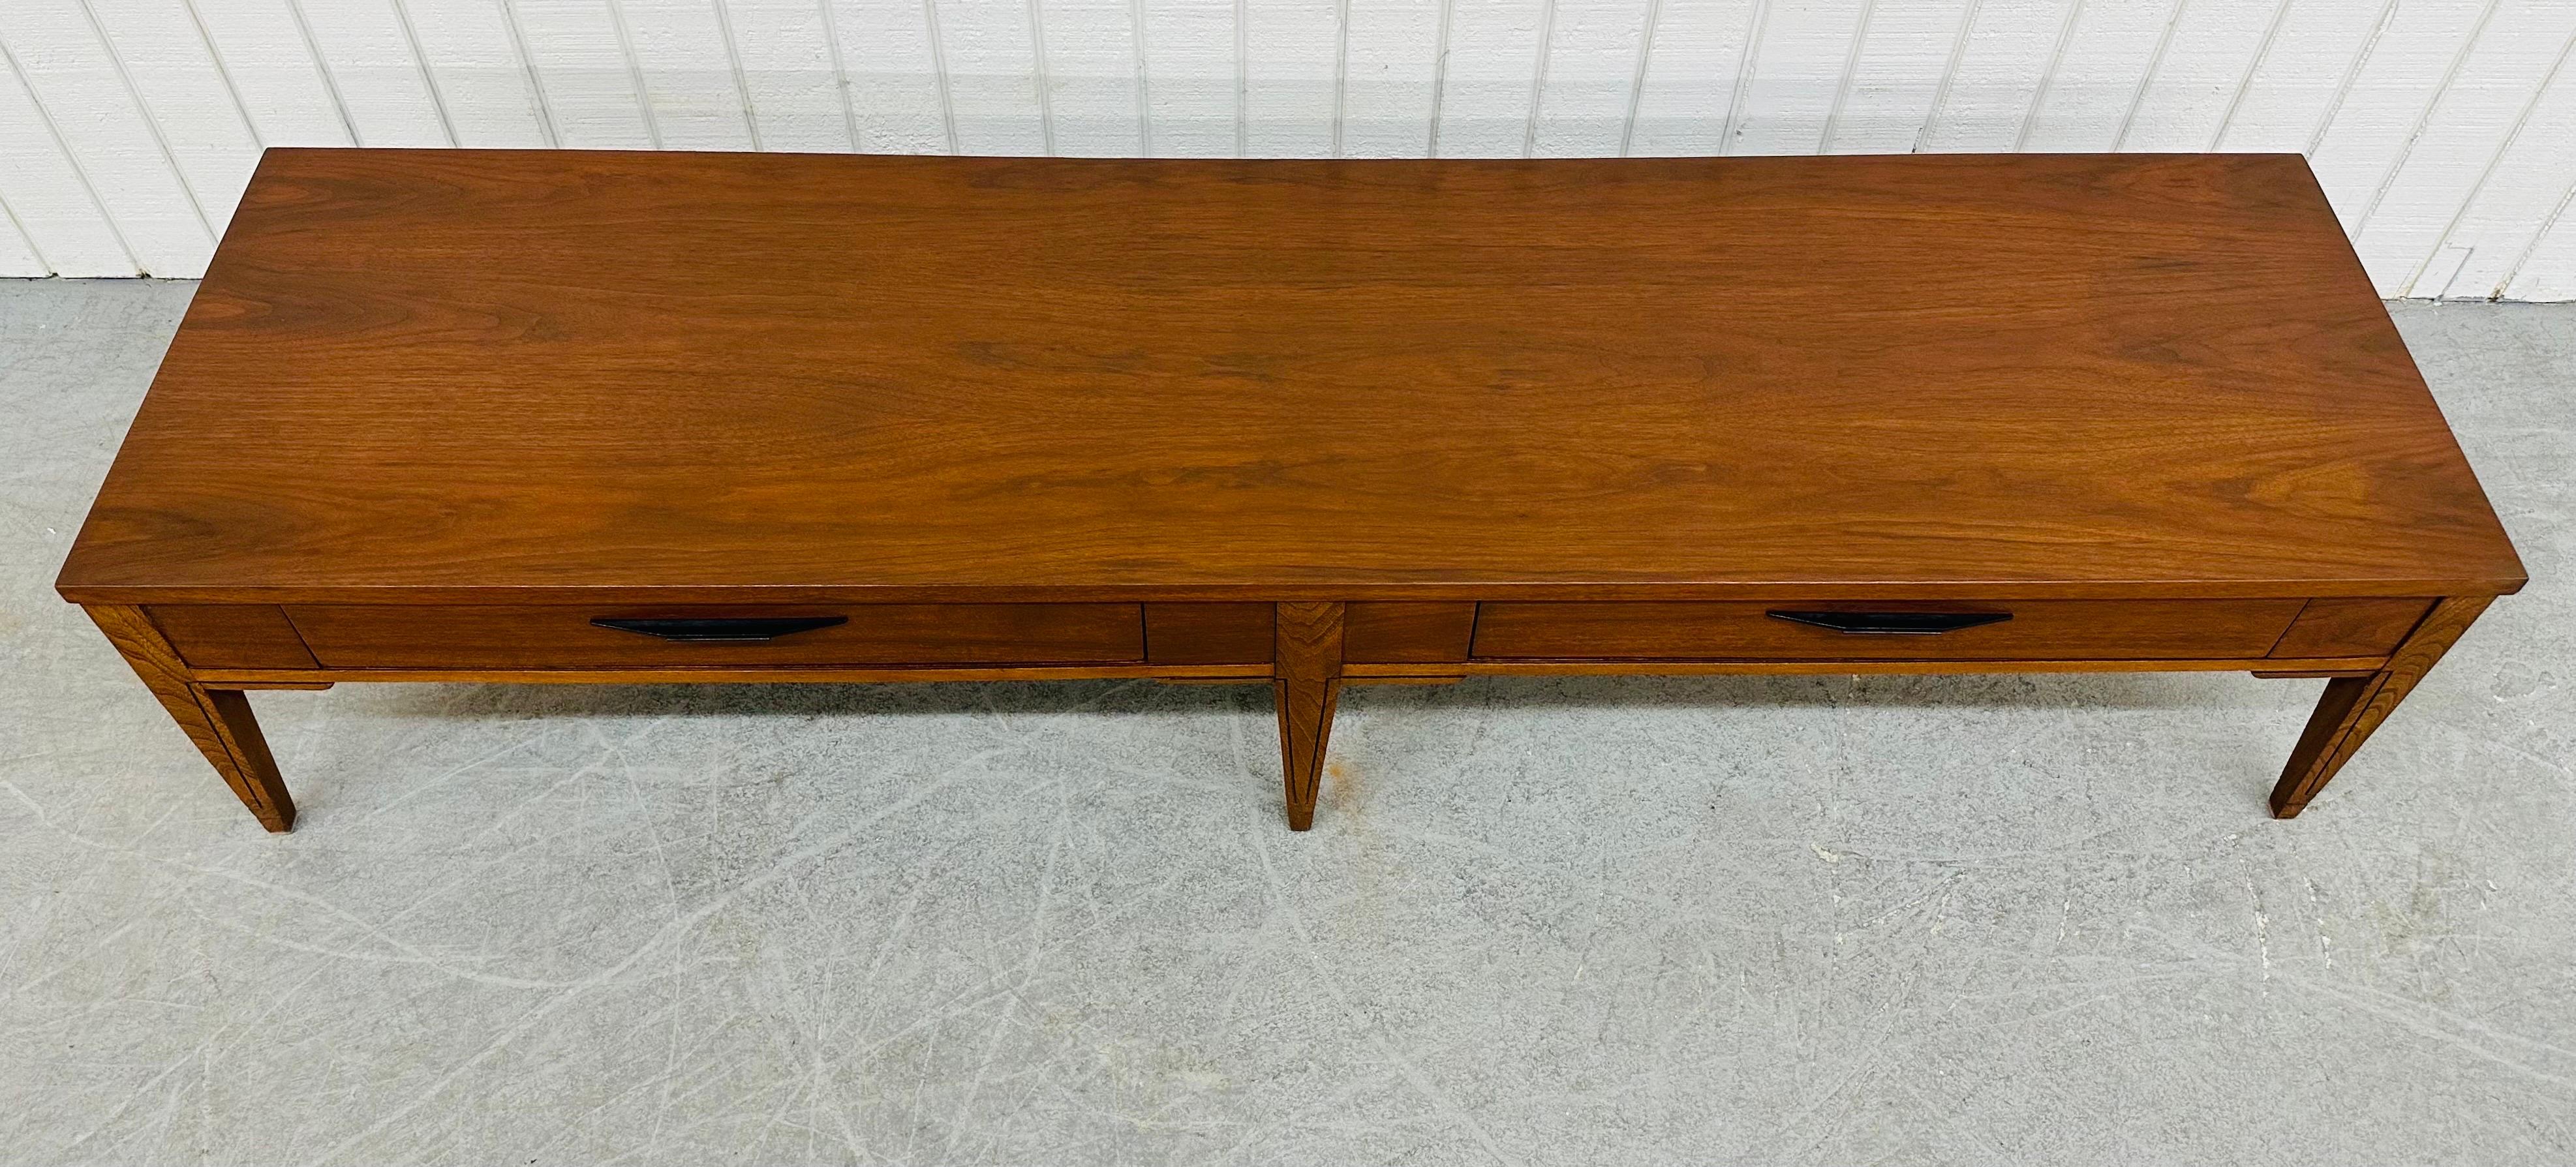 This listing is for a Mid-Century Modern Kent Coffey Tempo Walnut Coffee Table. Featuring a straight line design, long rectangular top, two drawers with original black metal hardware, modern legs, and a beautiful walnut finish. This is an